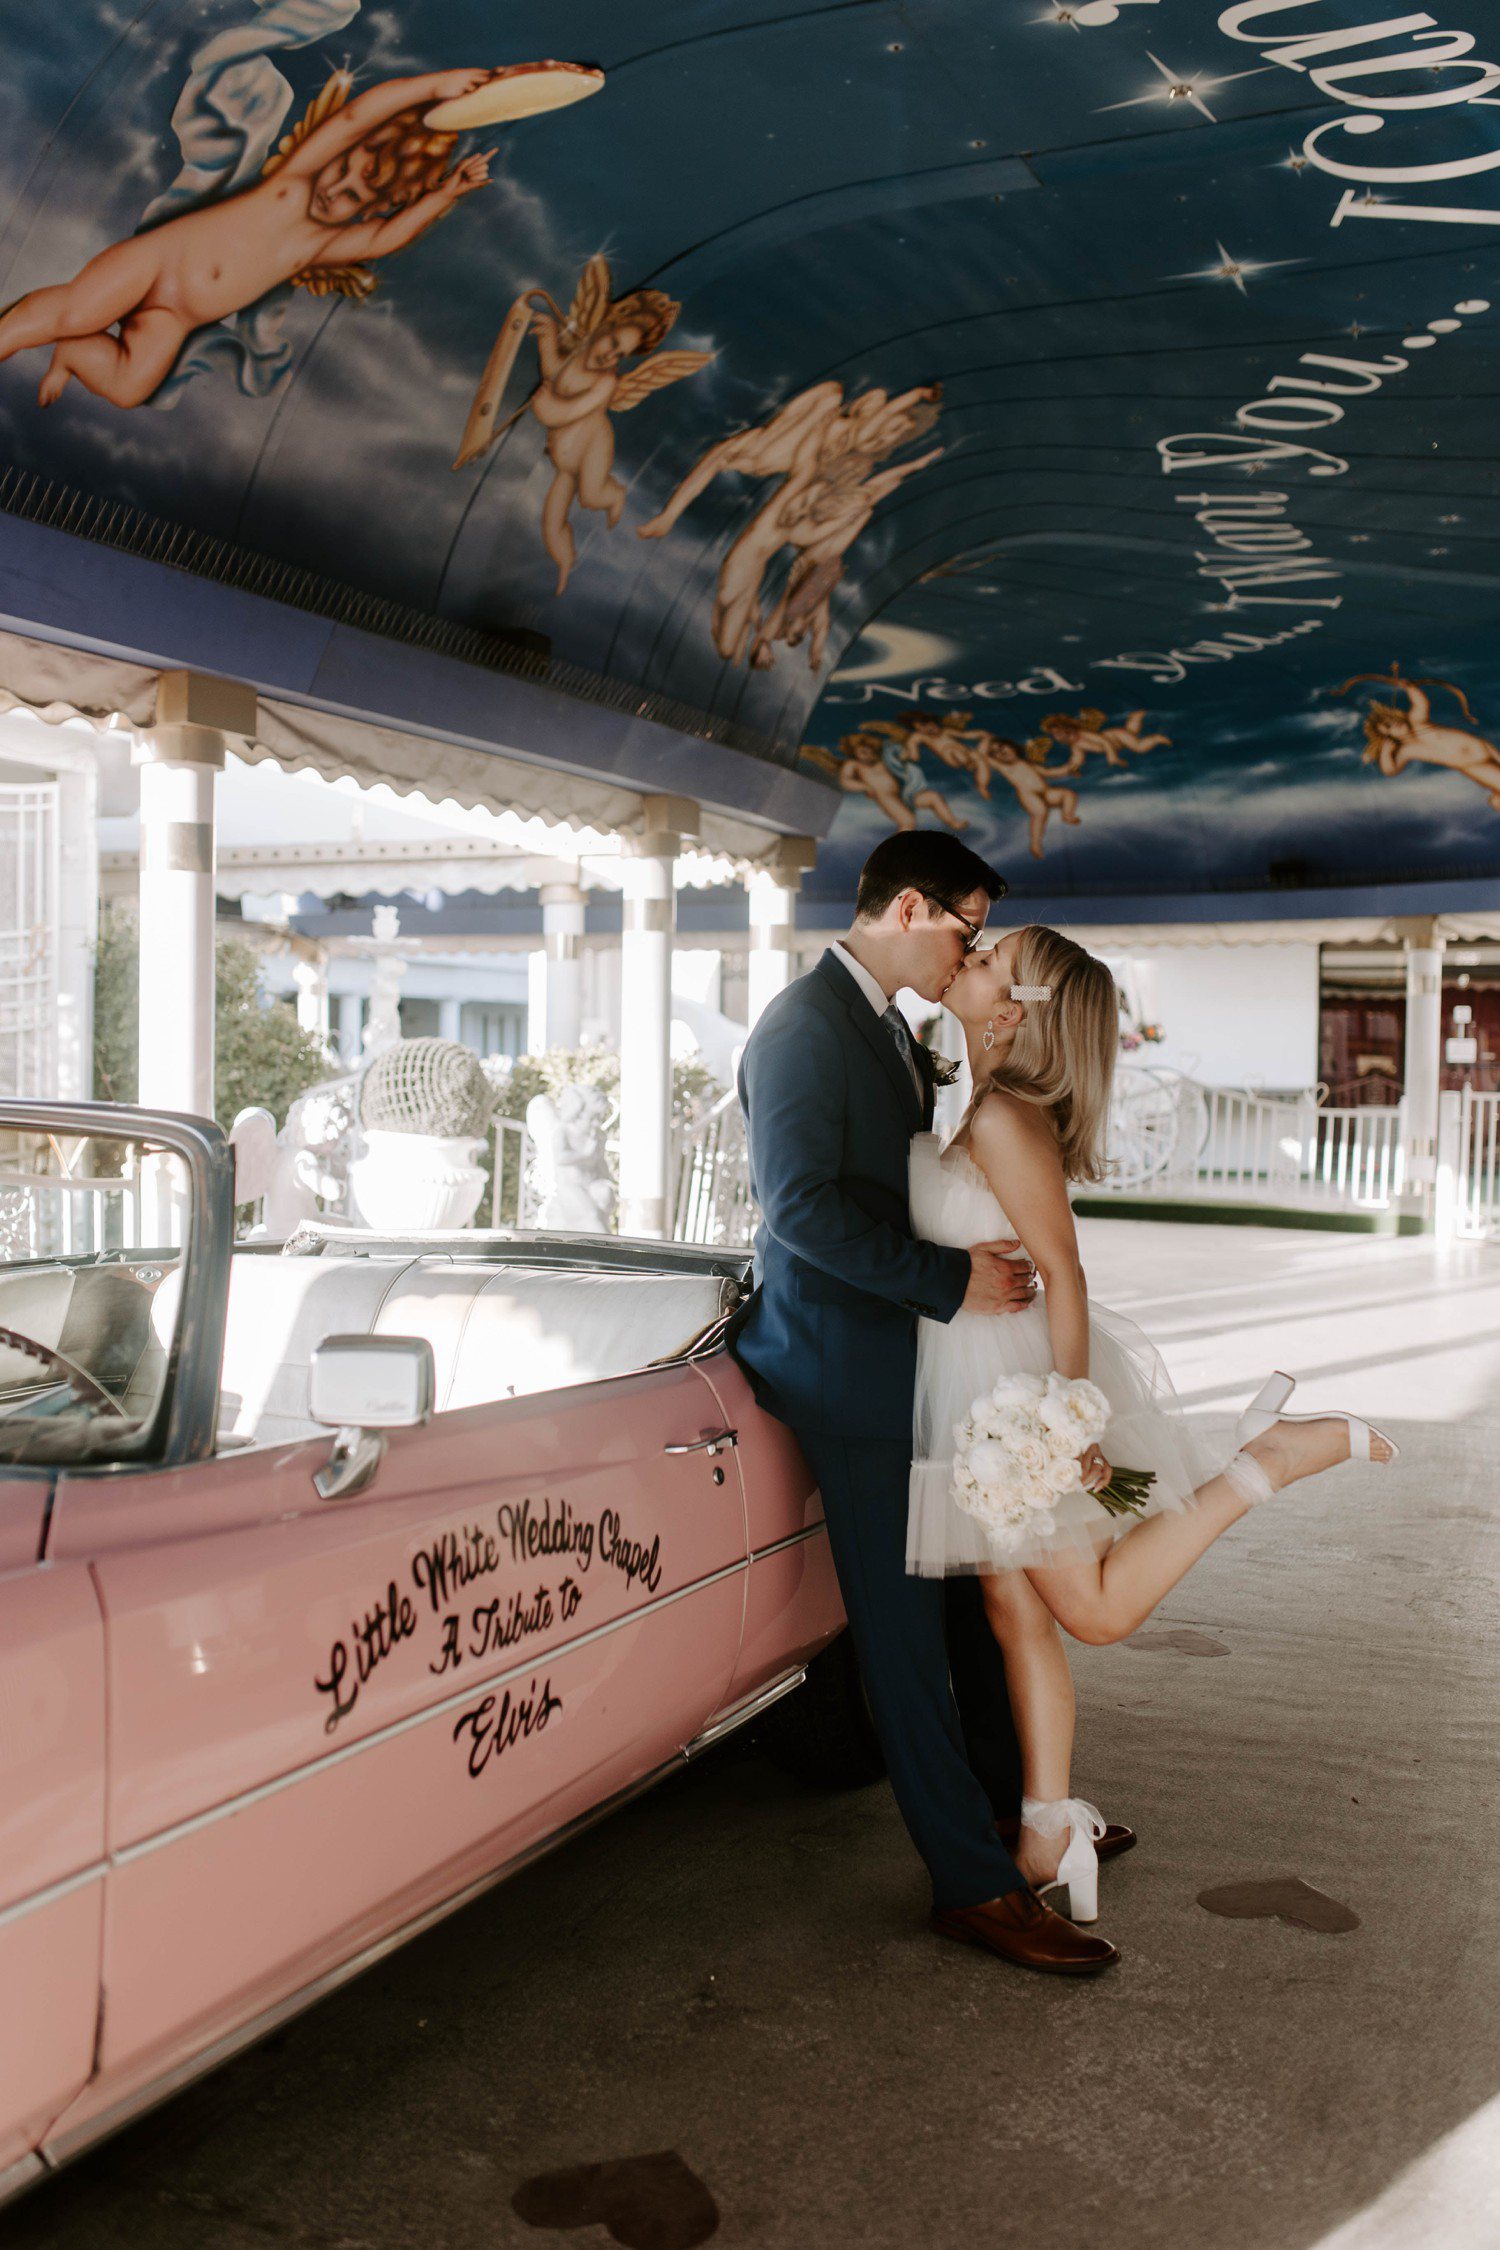 Tunnel of Love and Pink Cadillac A Little White Wedding Chapel